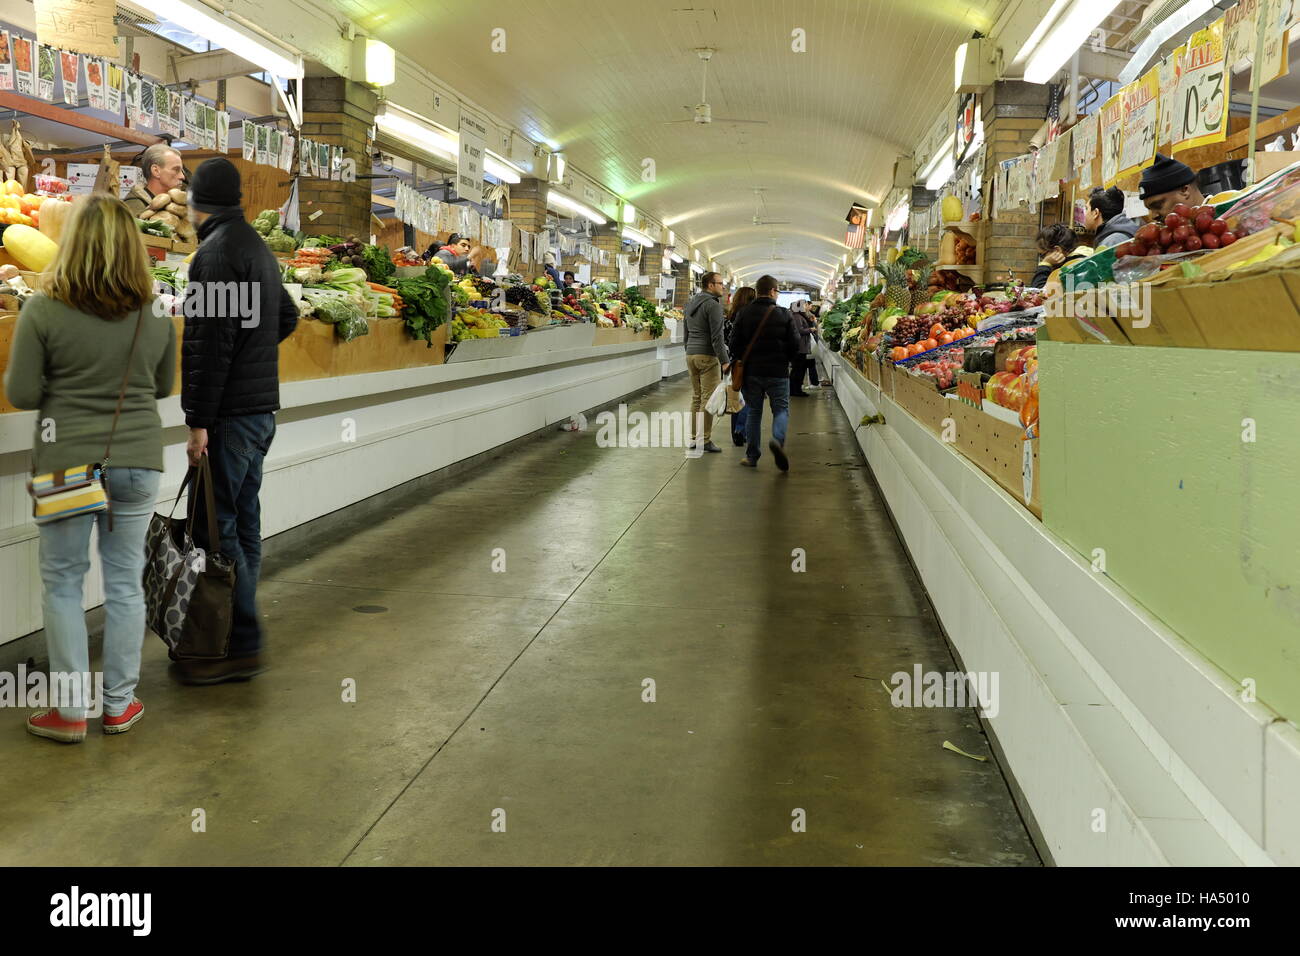 Vegetable market, a section of the historic West Side Market in Cleveland, Ohio, the United States. Stock Photo